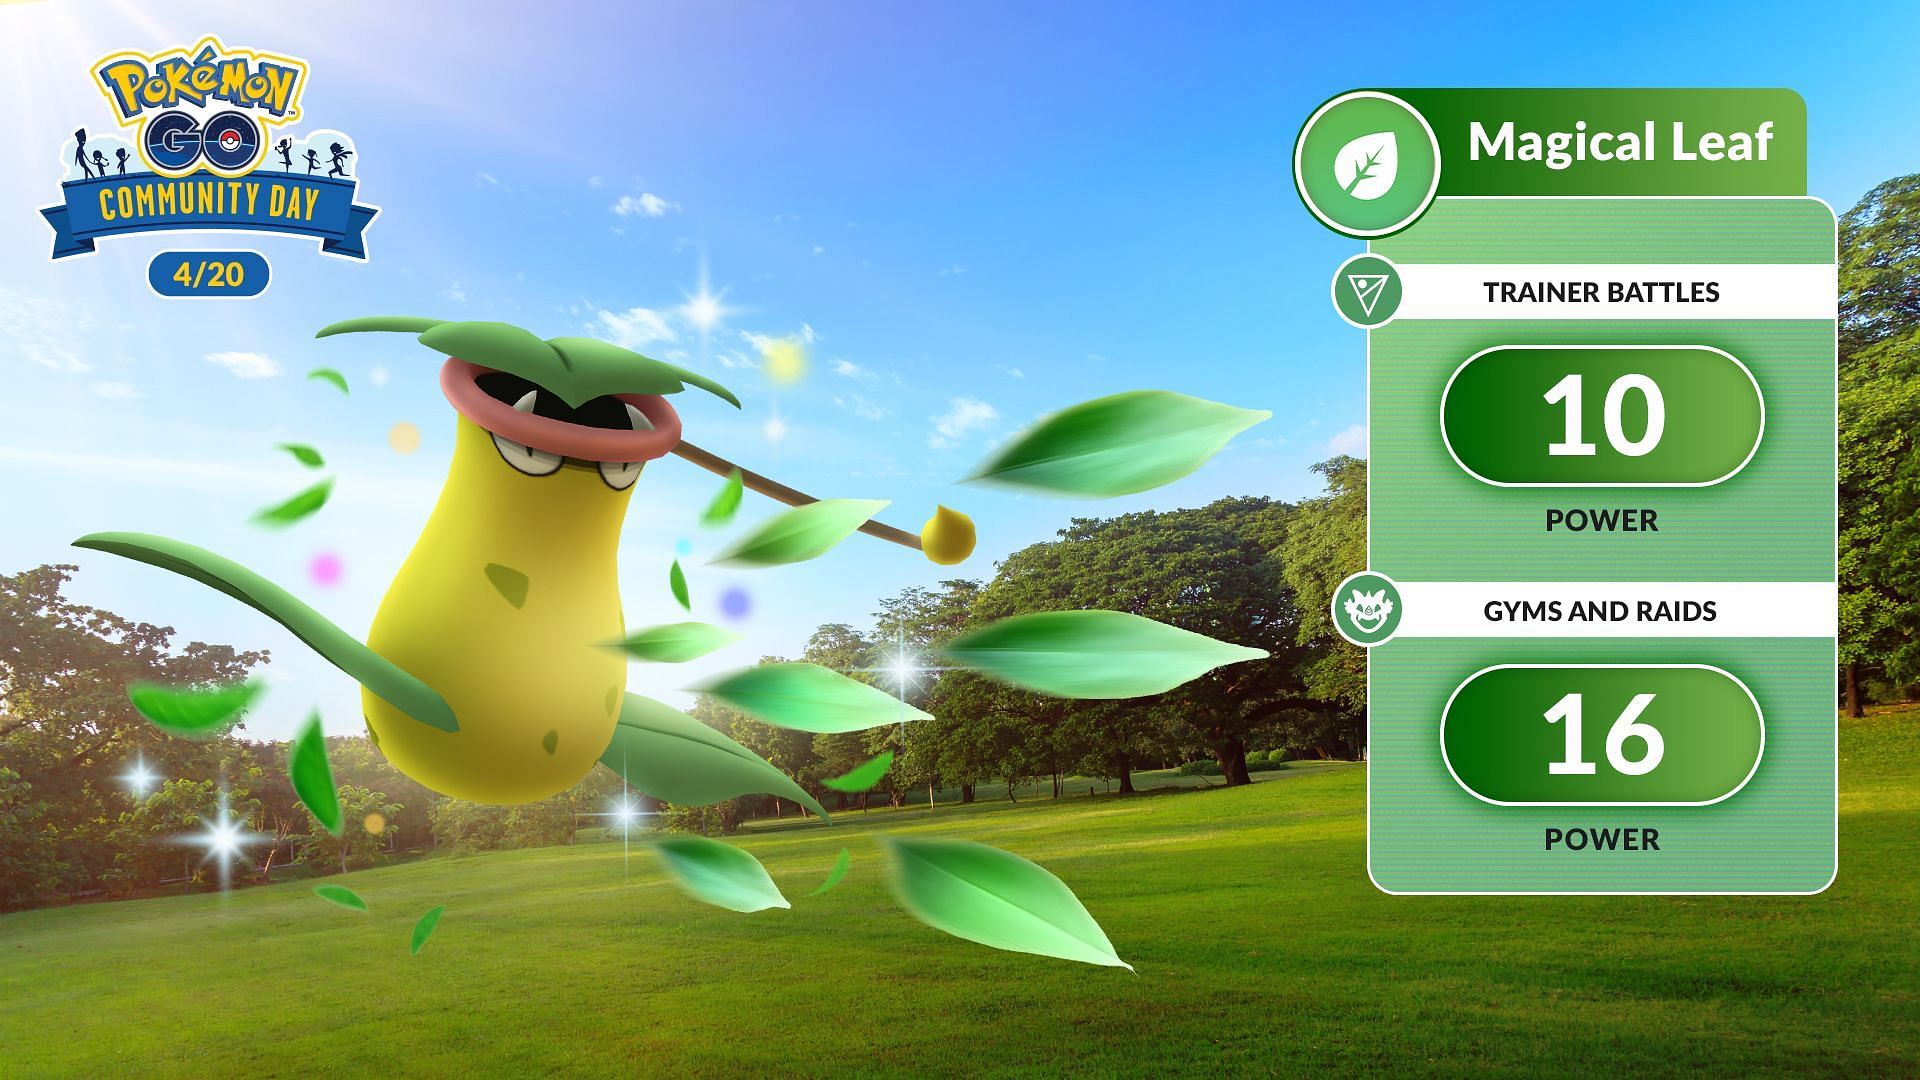 Victreebel with Magical Leaf in Pokemon GO